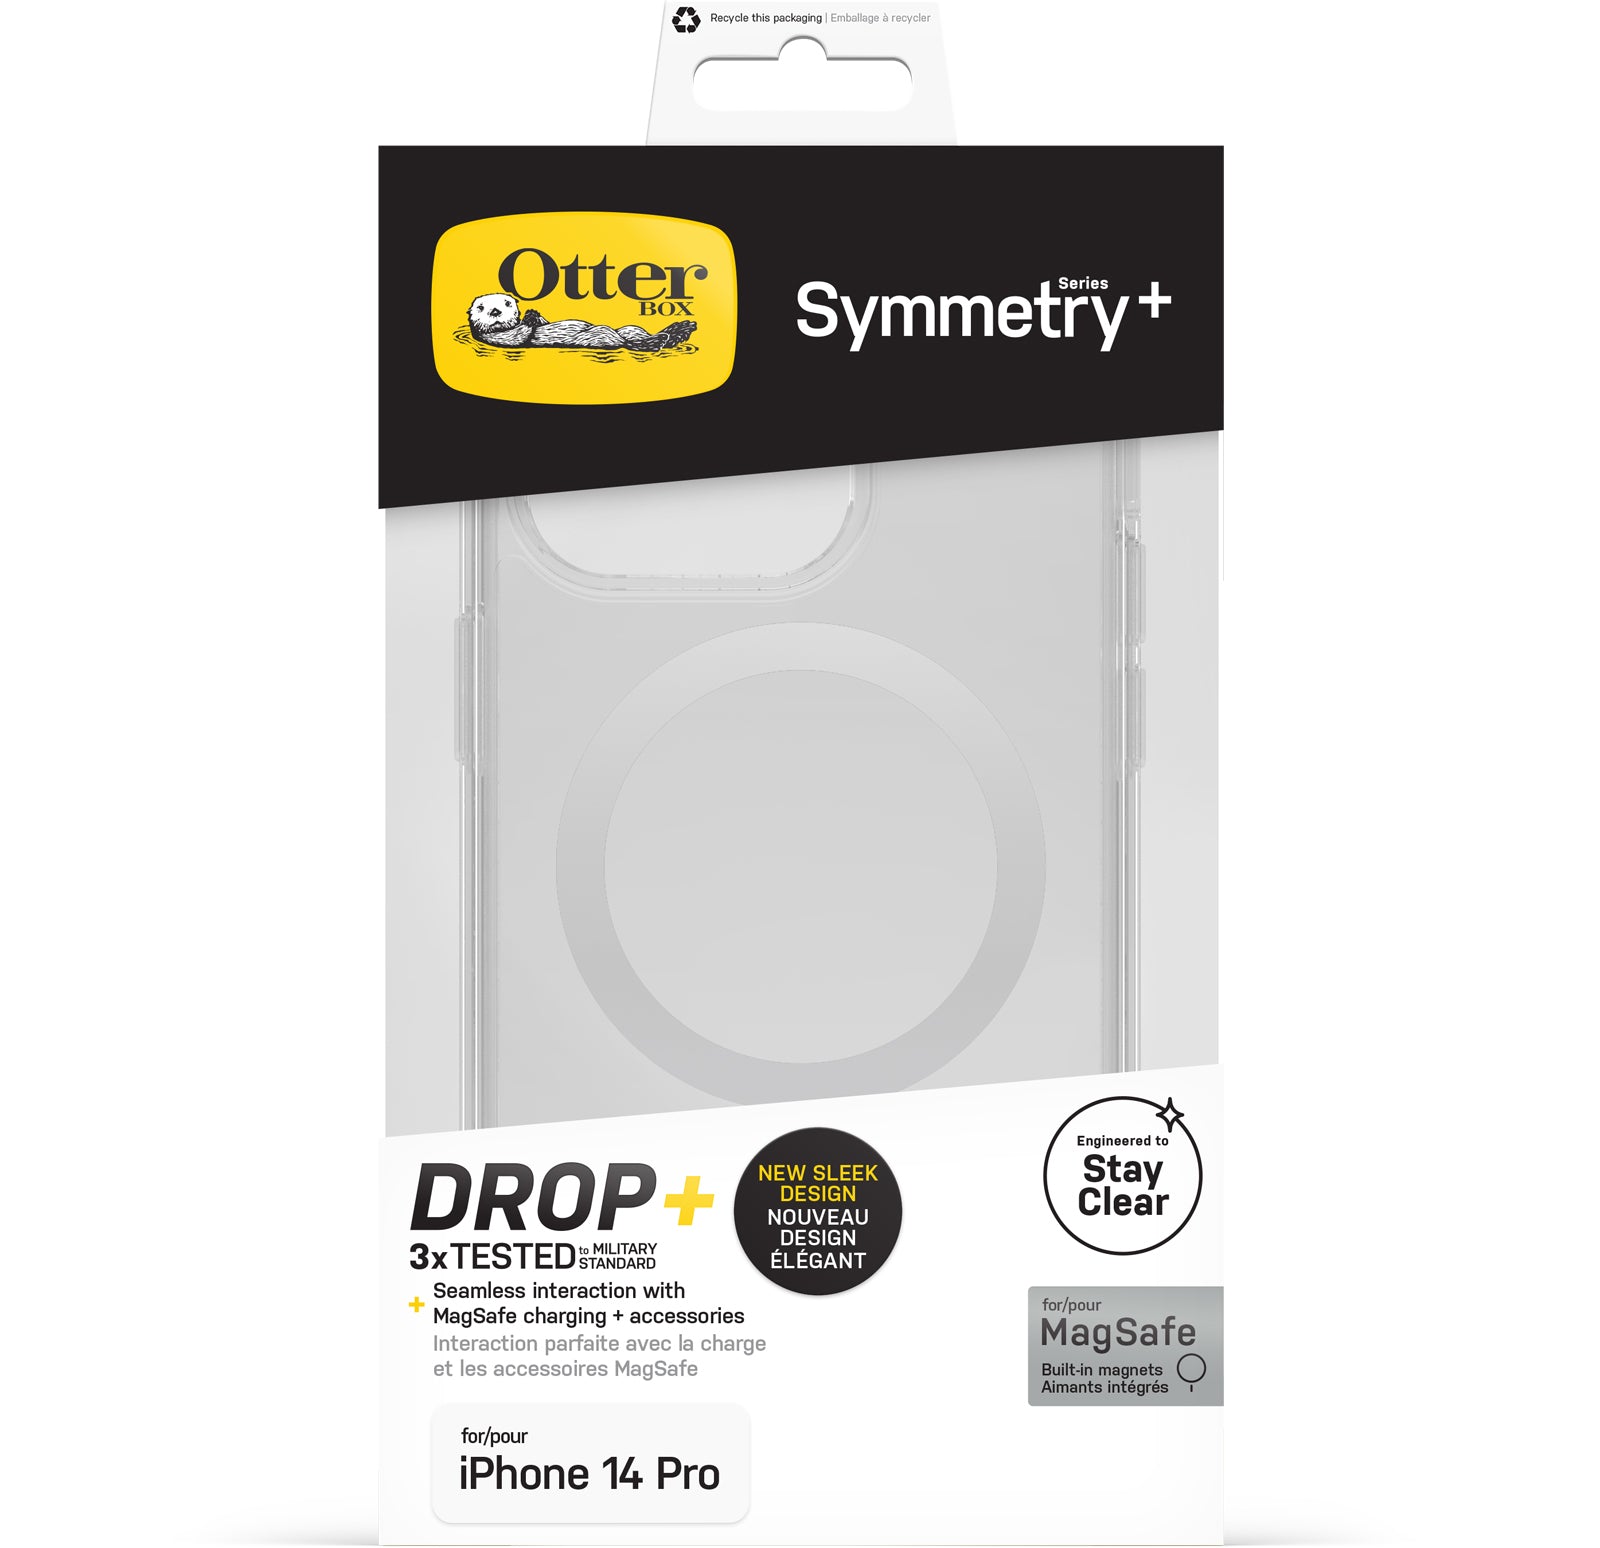 OtterBox Symmetry+ Clear Case for iPhone 14 Pro for MagSafe, Shockproof, Drop proof, Protective Thin Case, 3x Tested to Military Standard, Antimicrobial Protection, Clear